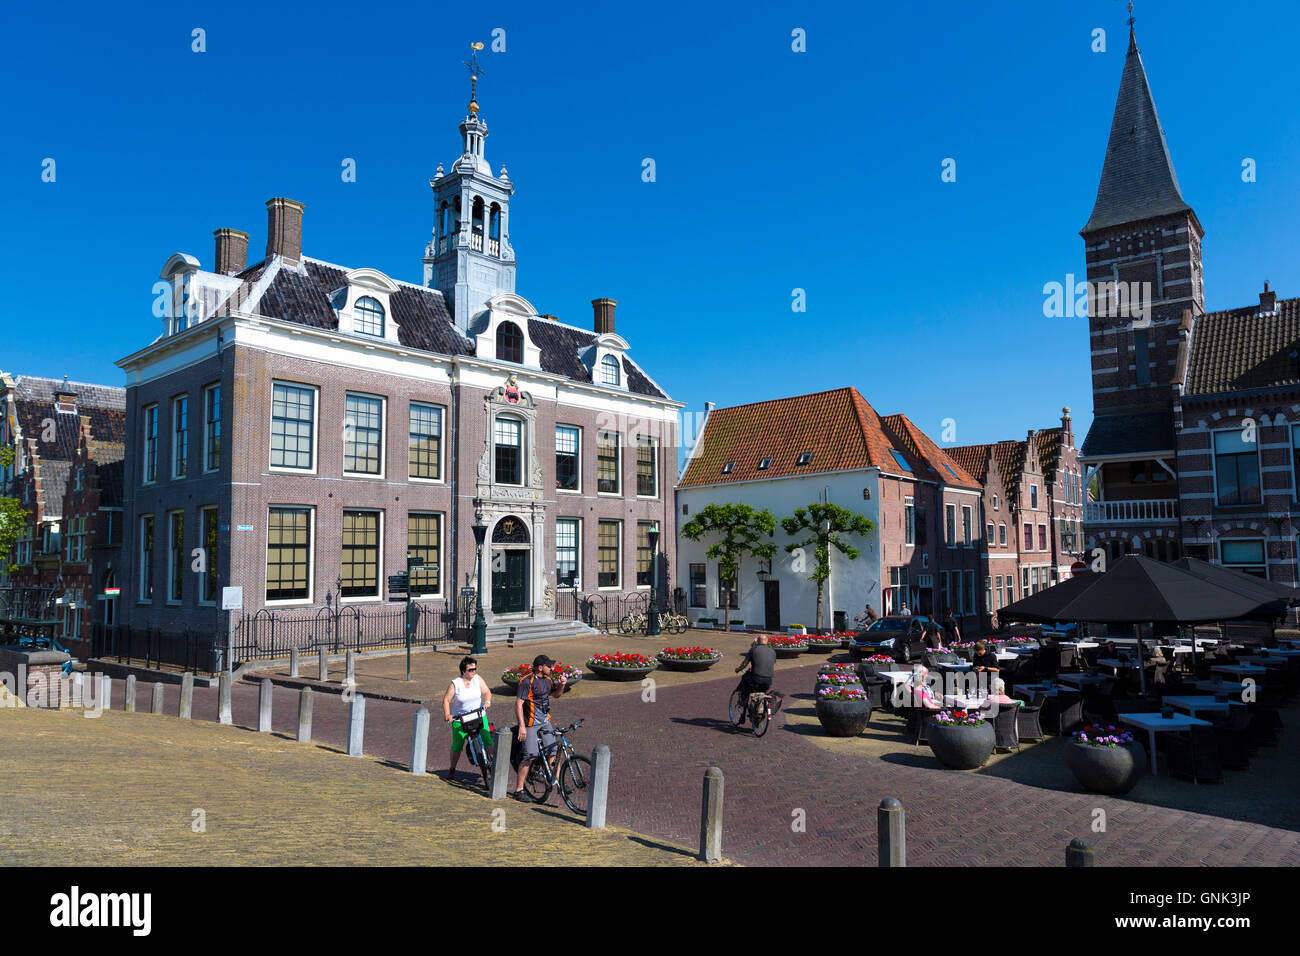 Cafe, Town Square and traditional architecture in Edam, The Netherlands Stock Photo